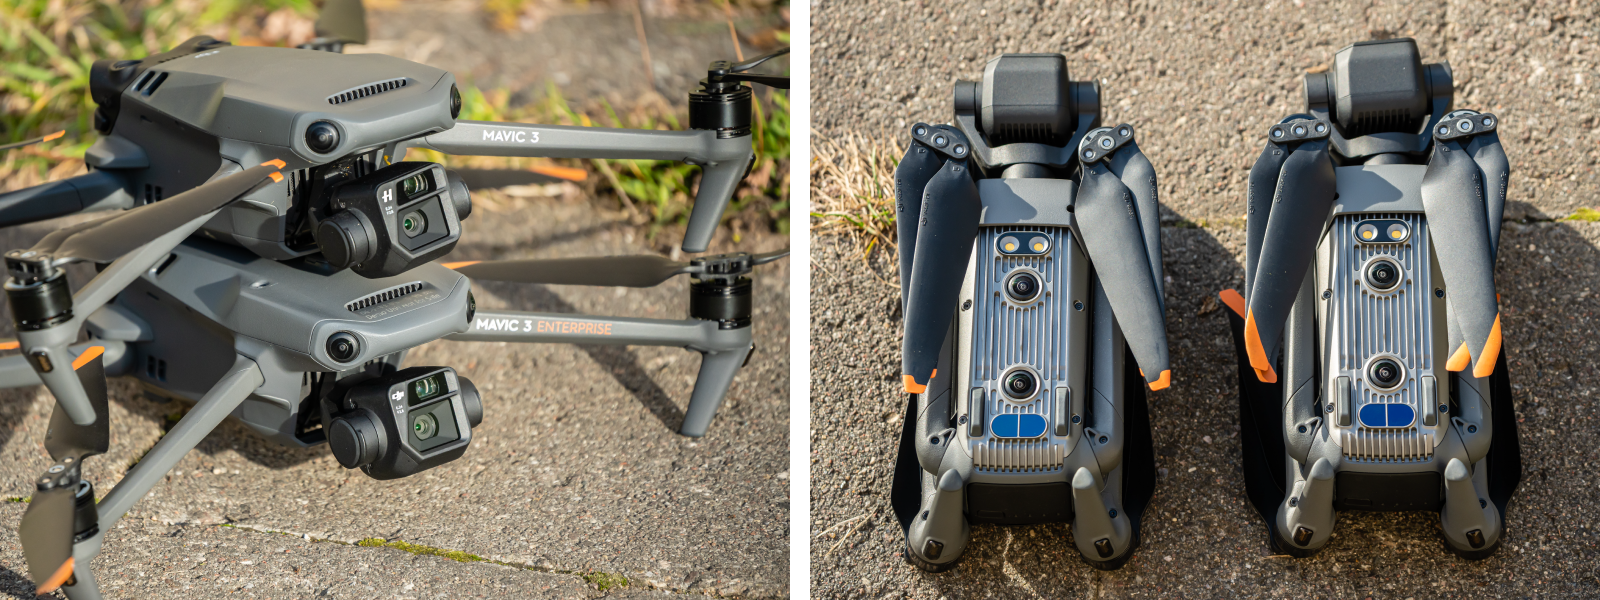 Tilt-Shift Photography: Create a Micro World with Your Drone - DJI Guides